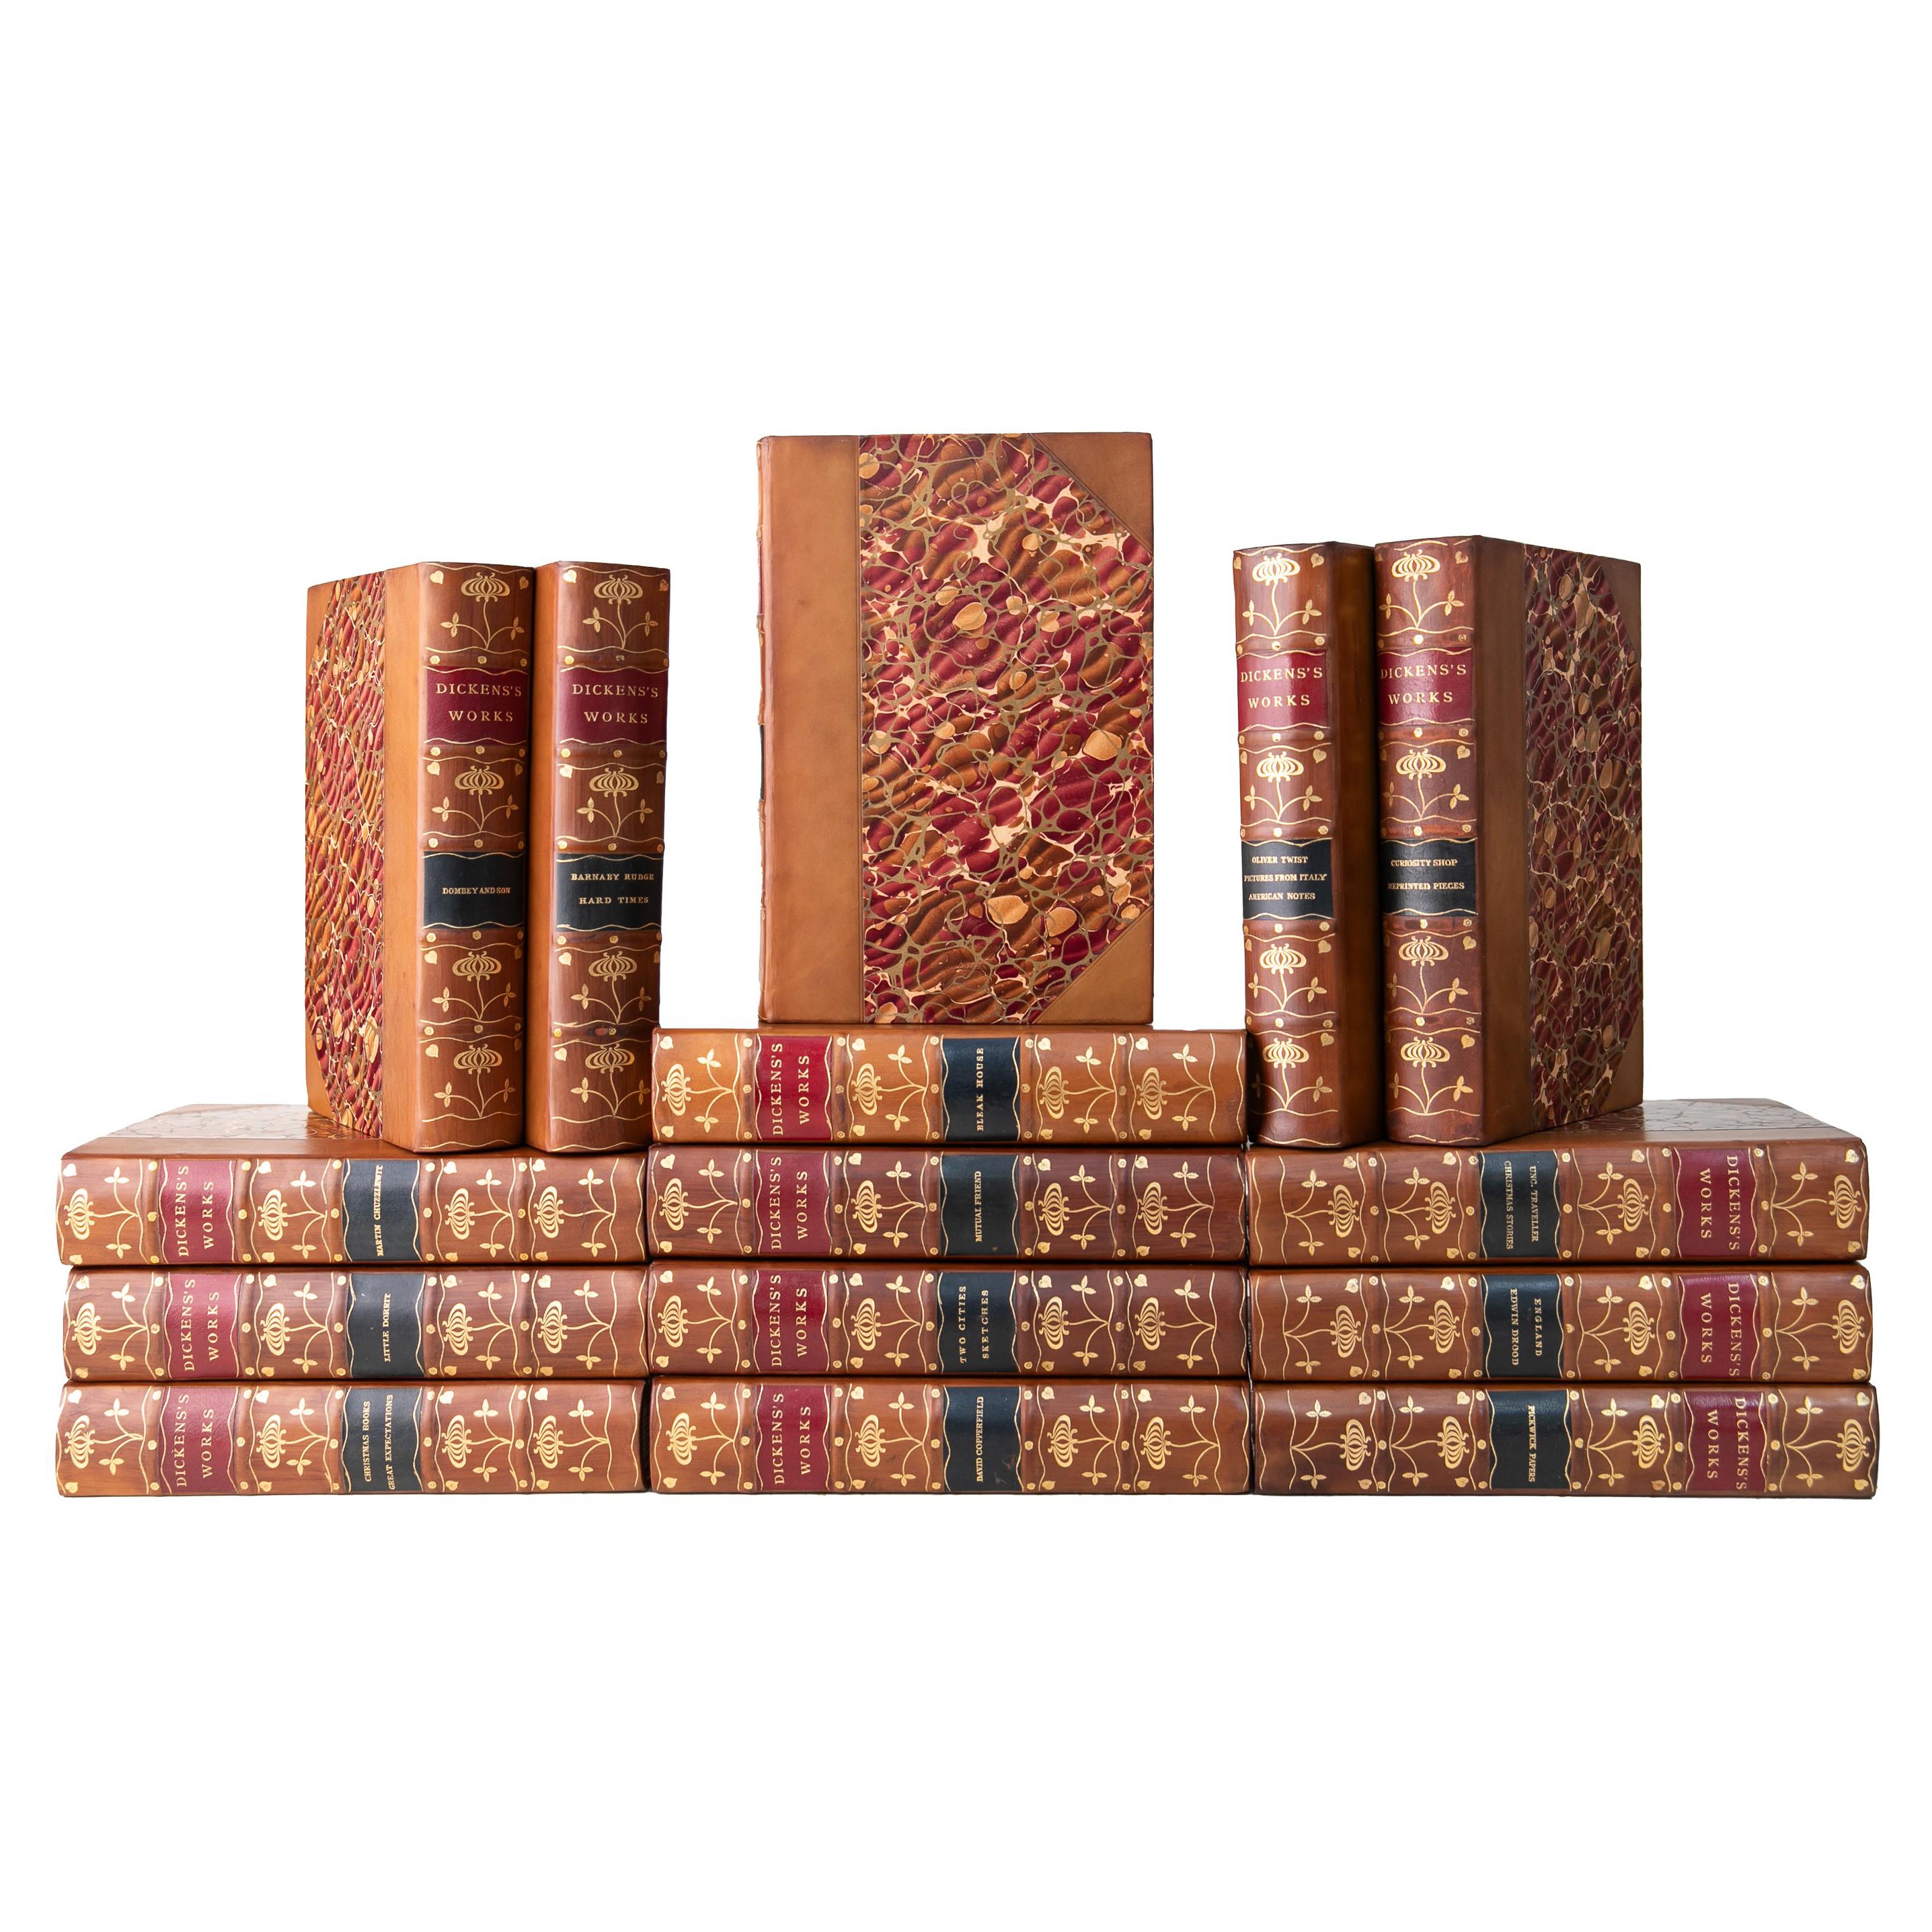 15 Volumes. Charles Dickens, The Works.